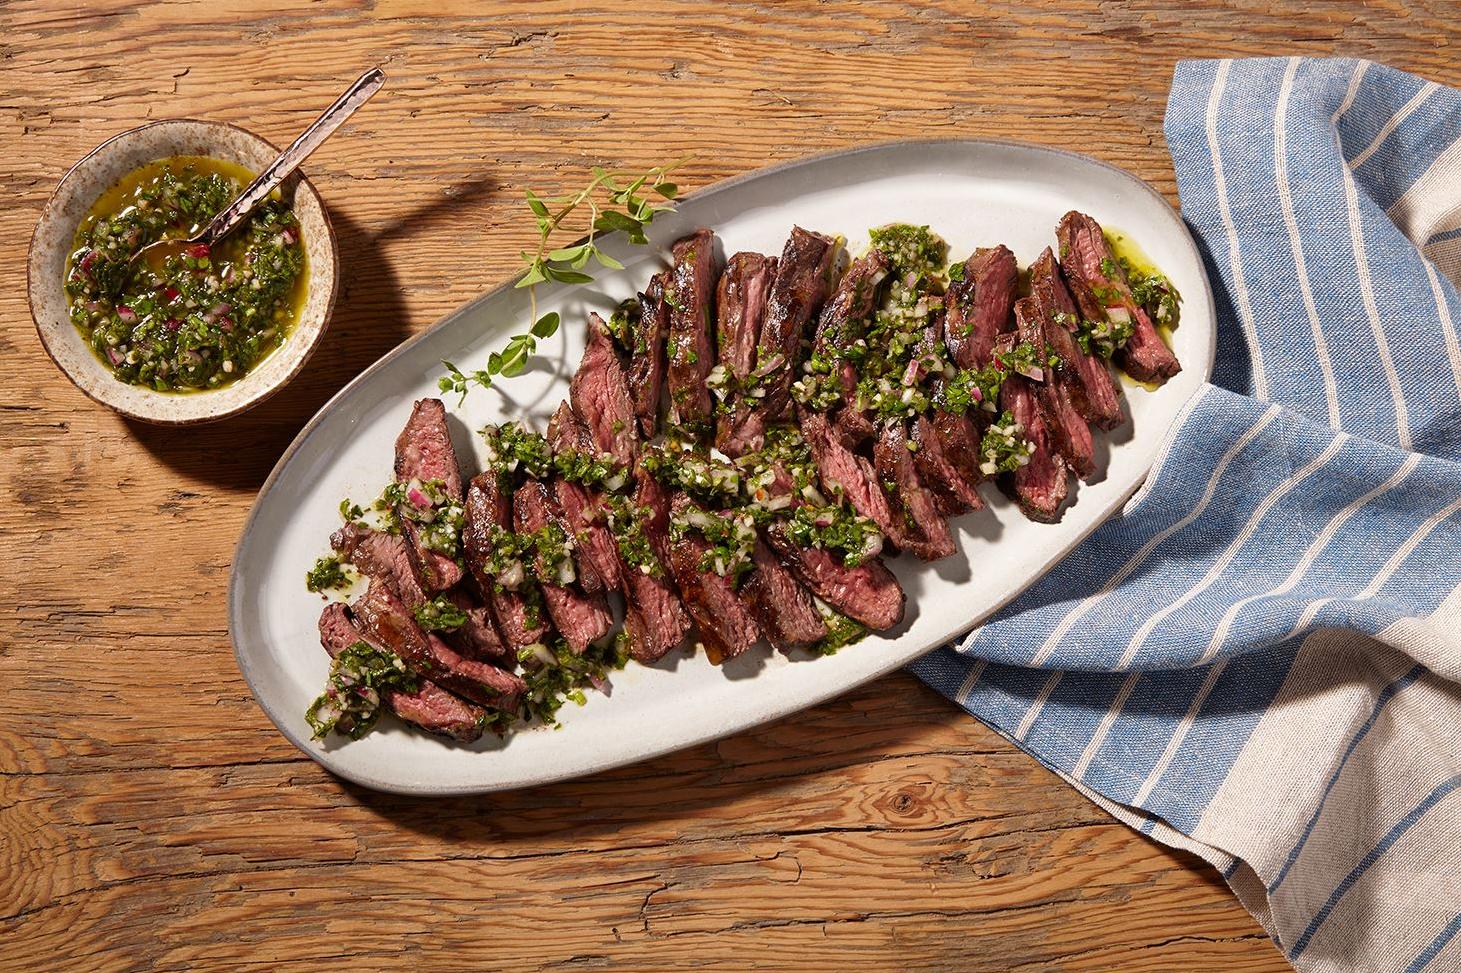  The secret to perfectly cooked churrasco is all in the marinade.